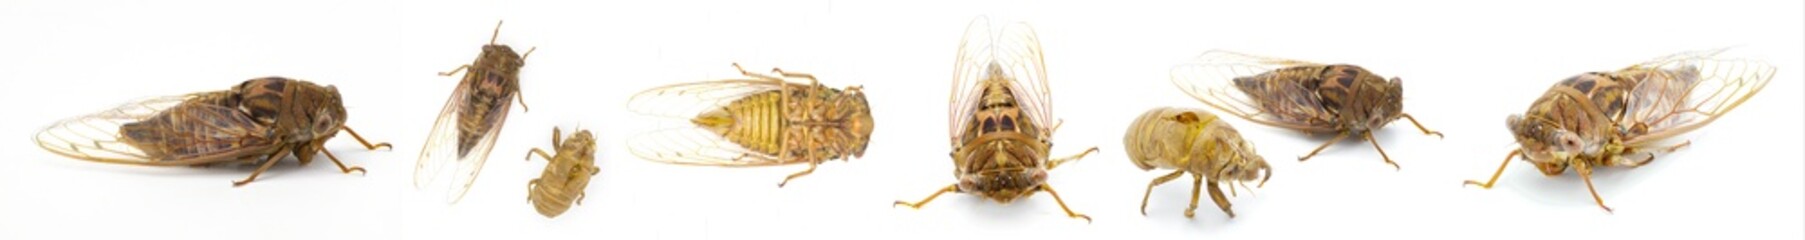 Very large Resonant Cicada or Southern pine barrens cicada fly - Megatibicen resonans - a loud...